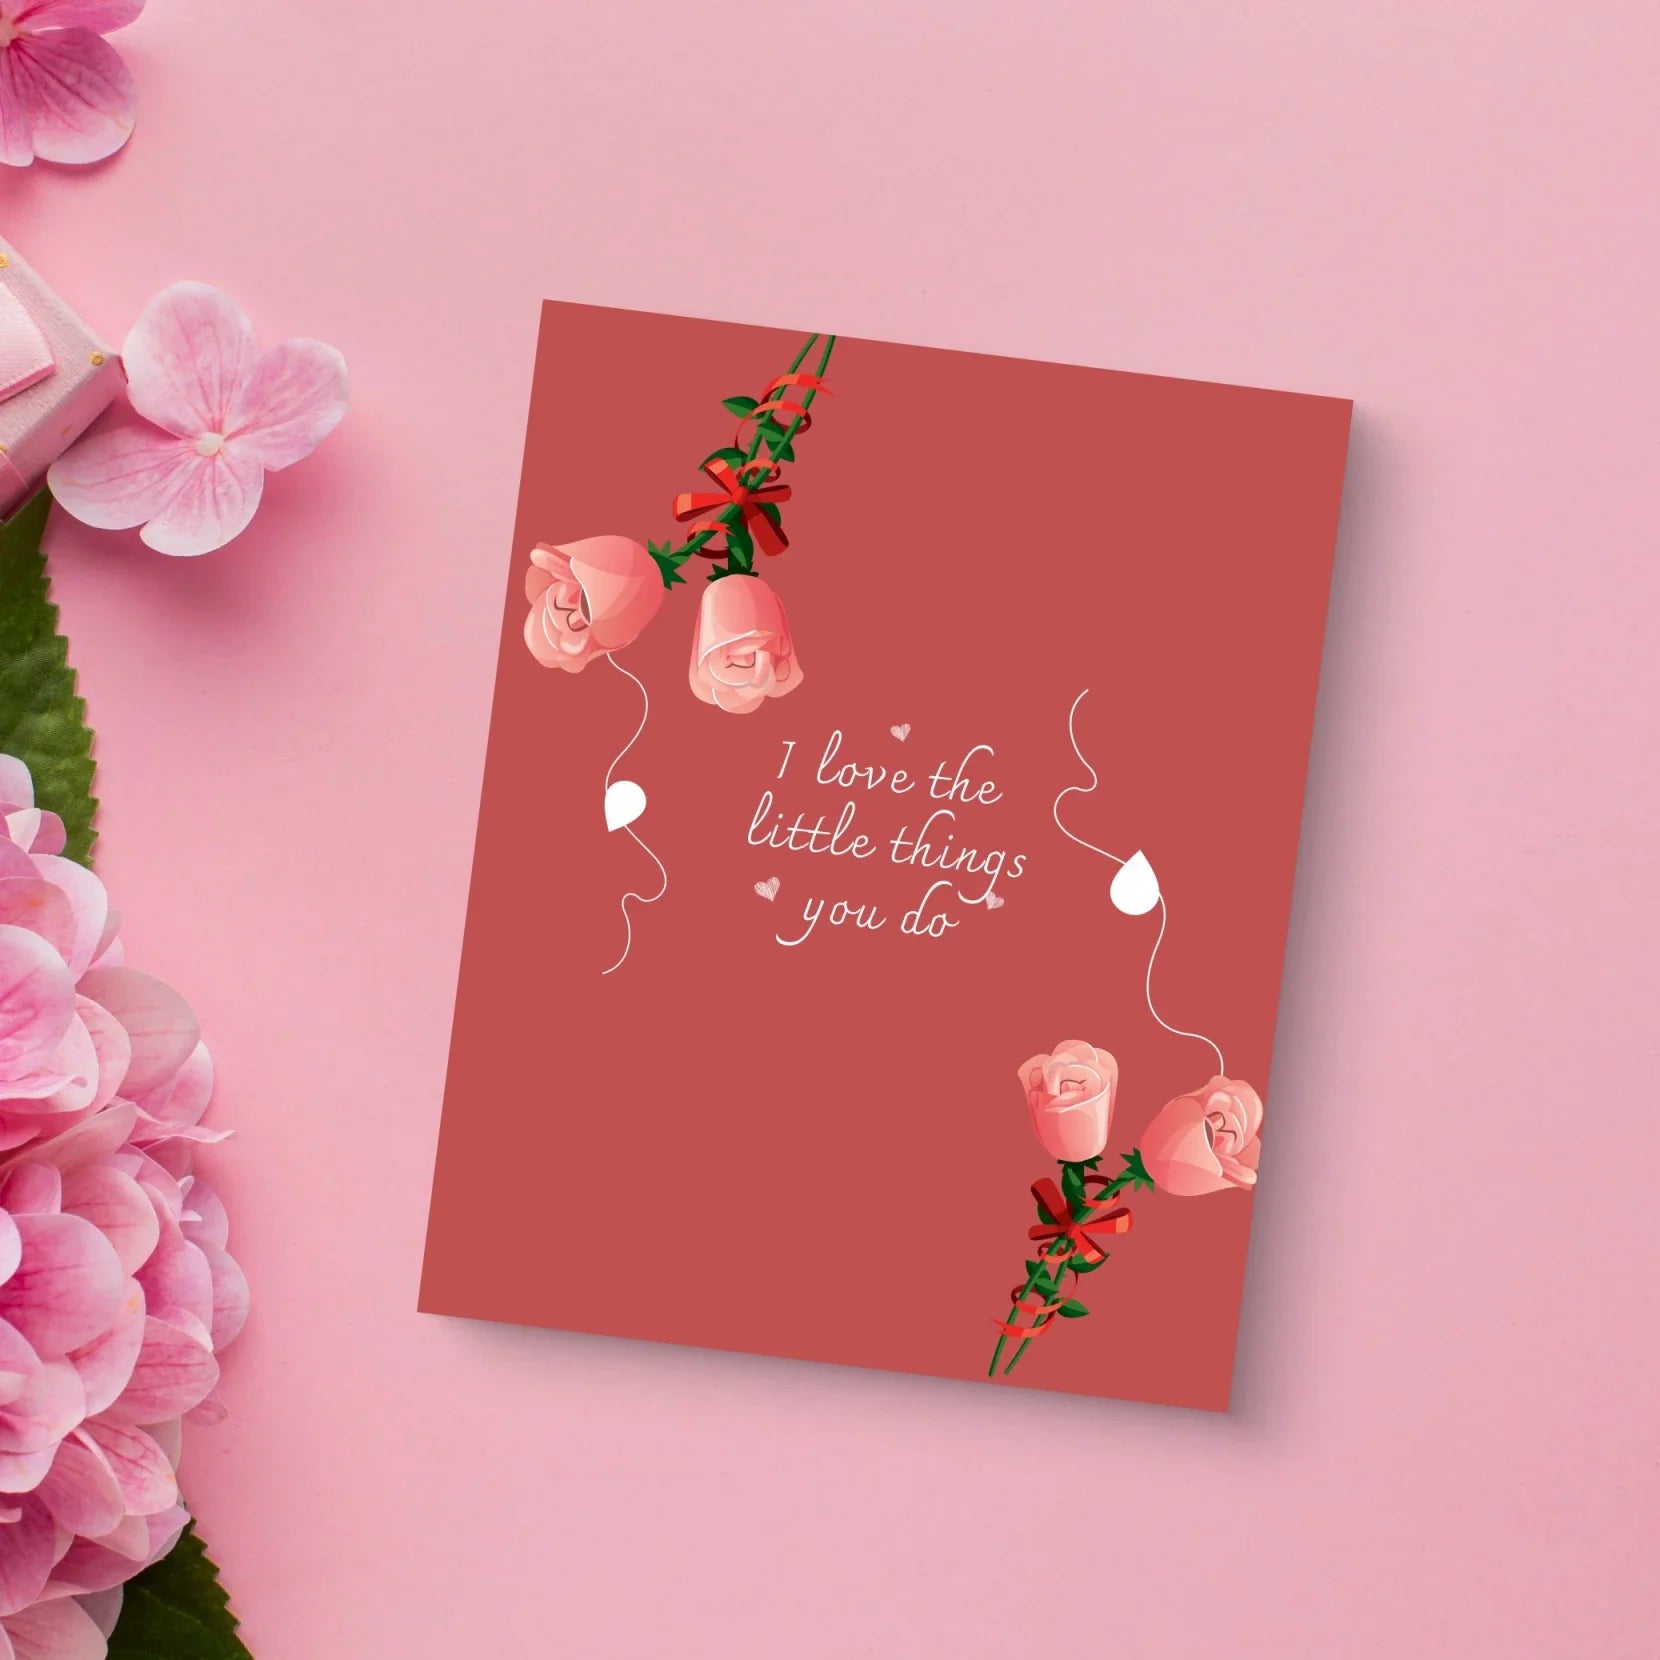 "Share your feelings for your special someone from the core of your heart with a romantic postcard  "